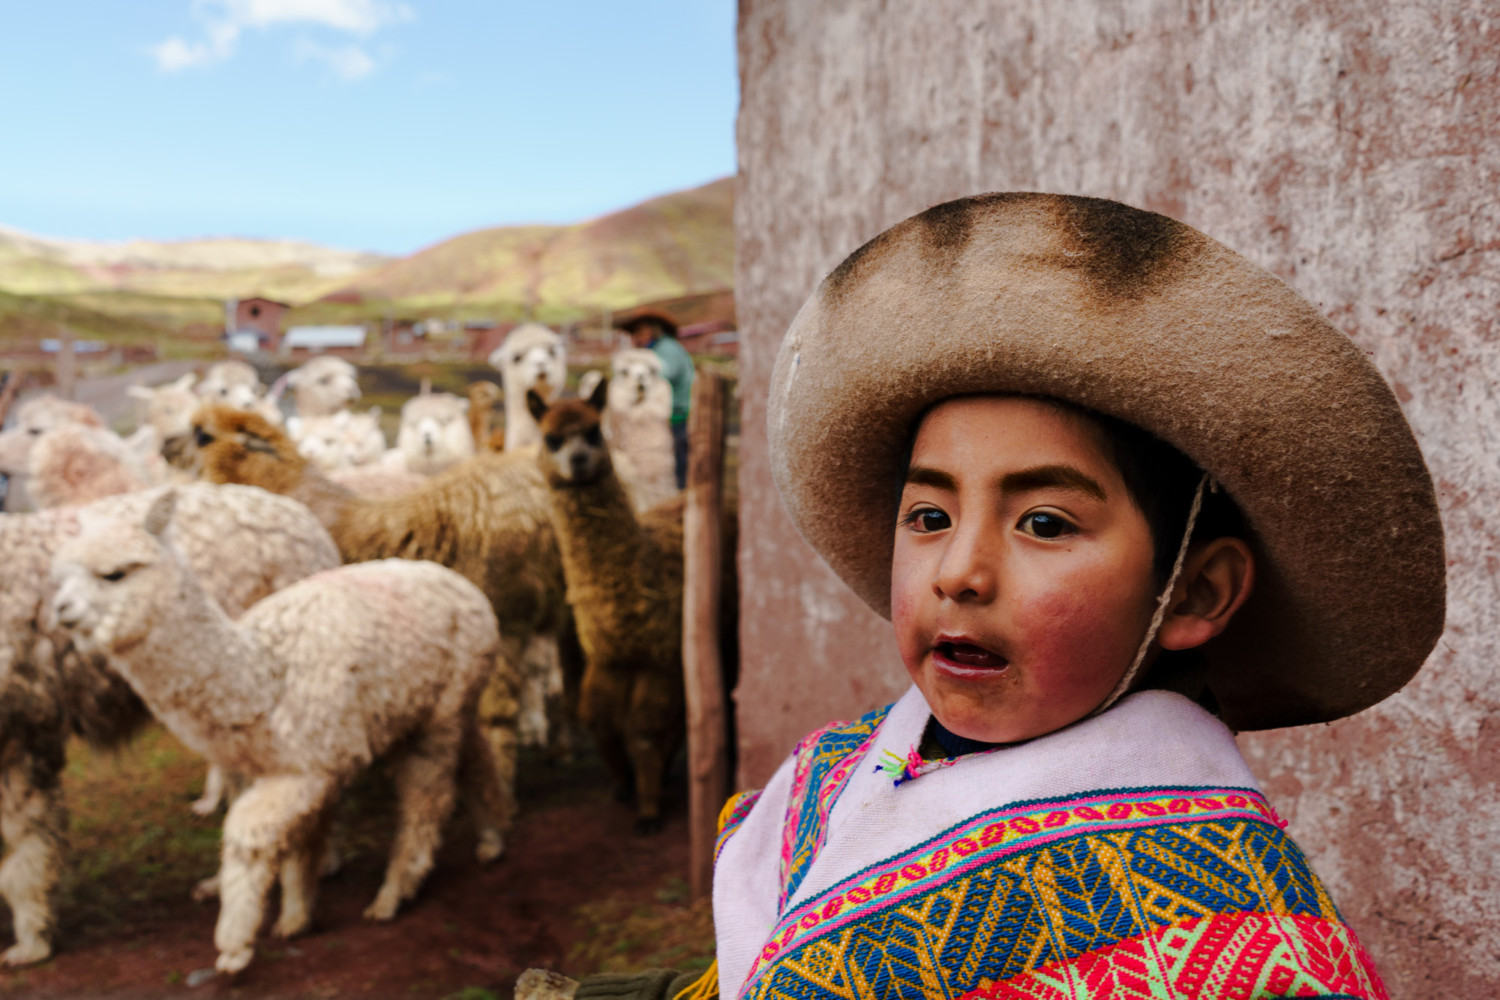 Neymar, a young boy in rural Peru. A Fresh Perspectives in Travel Photography